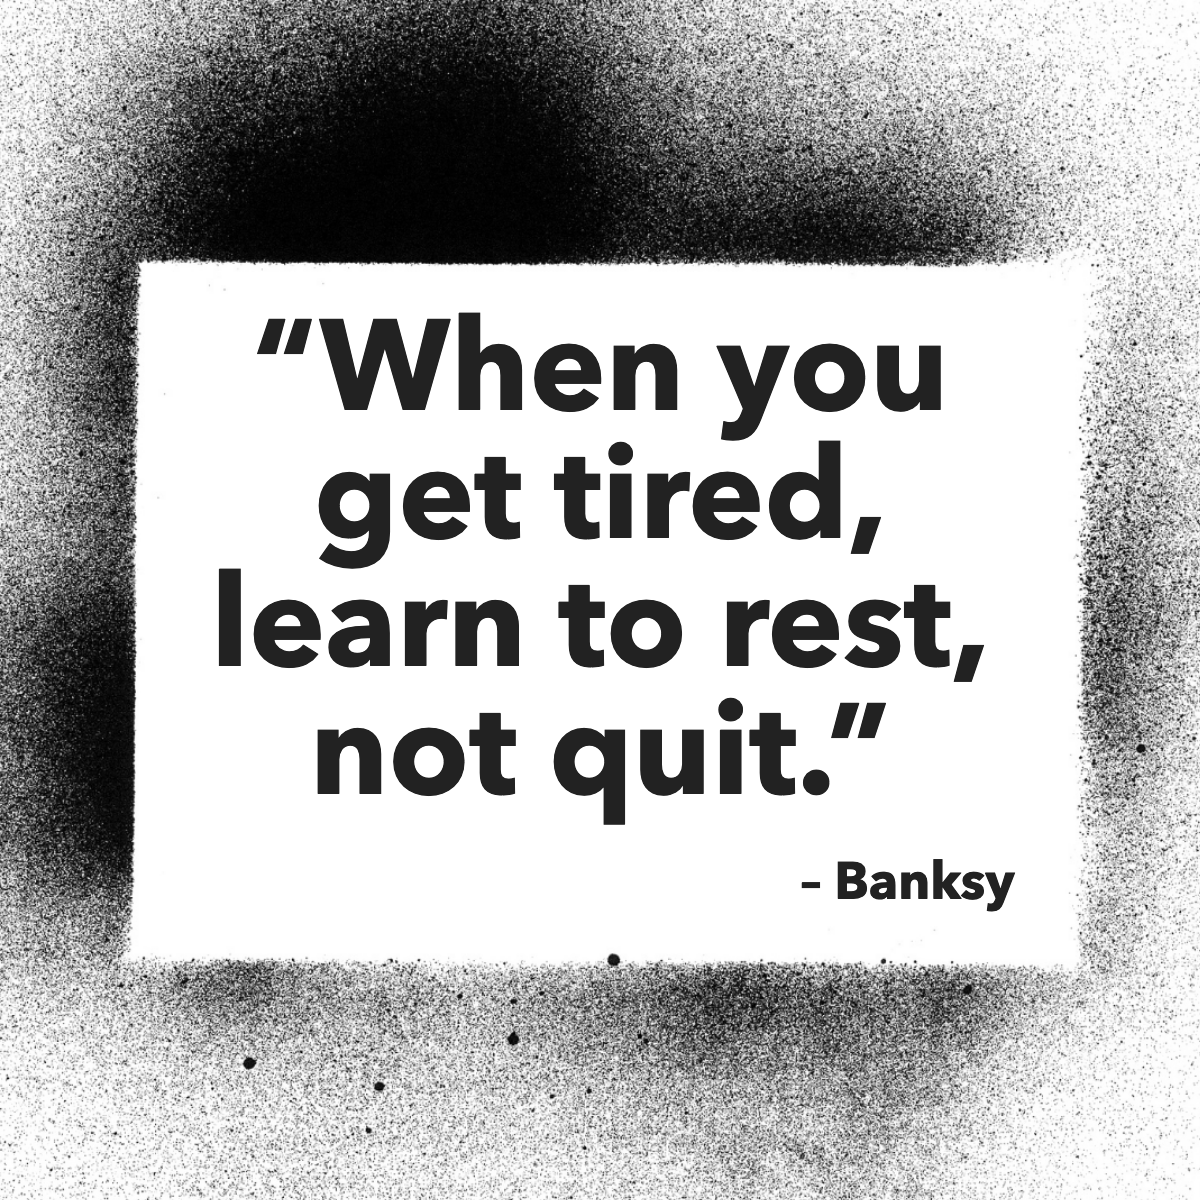 Don't feel guilty if you ever get tired, take your time ... 😉

#motivationnation #motivationalquotesdaily #quoteoftheday #quoteofday #quotedaily

 #nytofl #floridarealestate #centralfloridarealestate